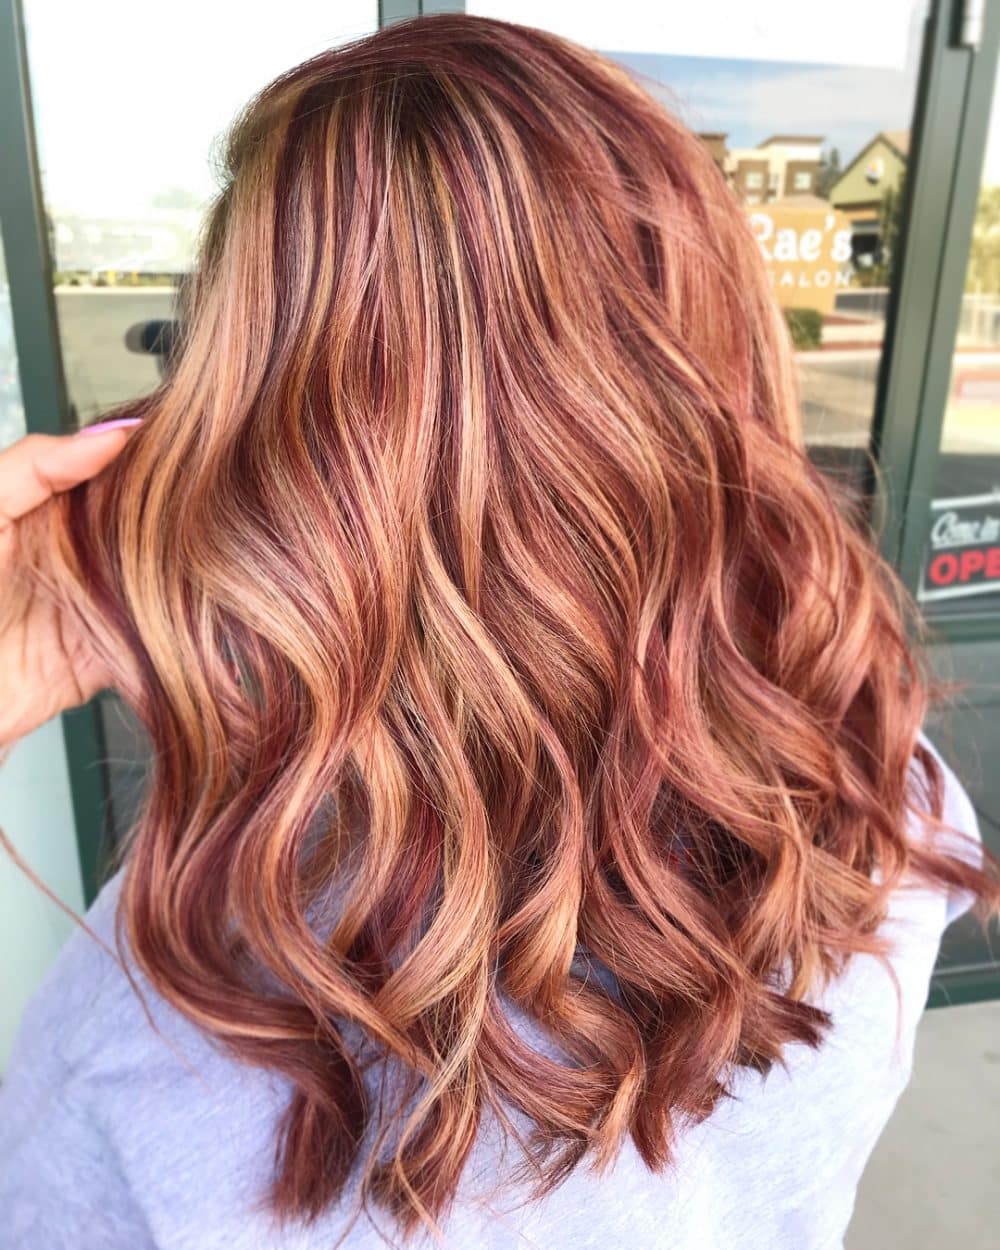 Ignite Your Style With The Perfect Blend Of Red And Blonde Hair Colors Get Ready To Make A